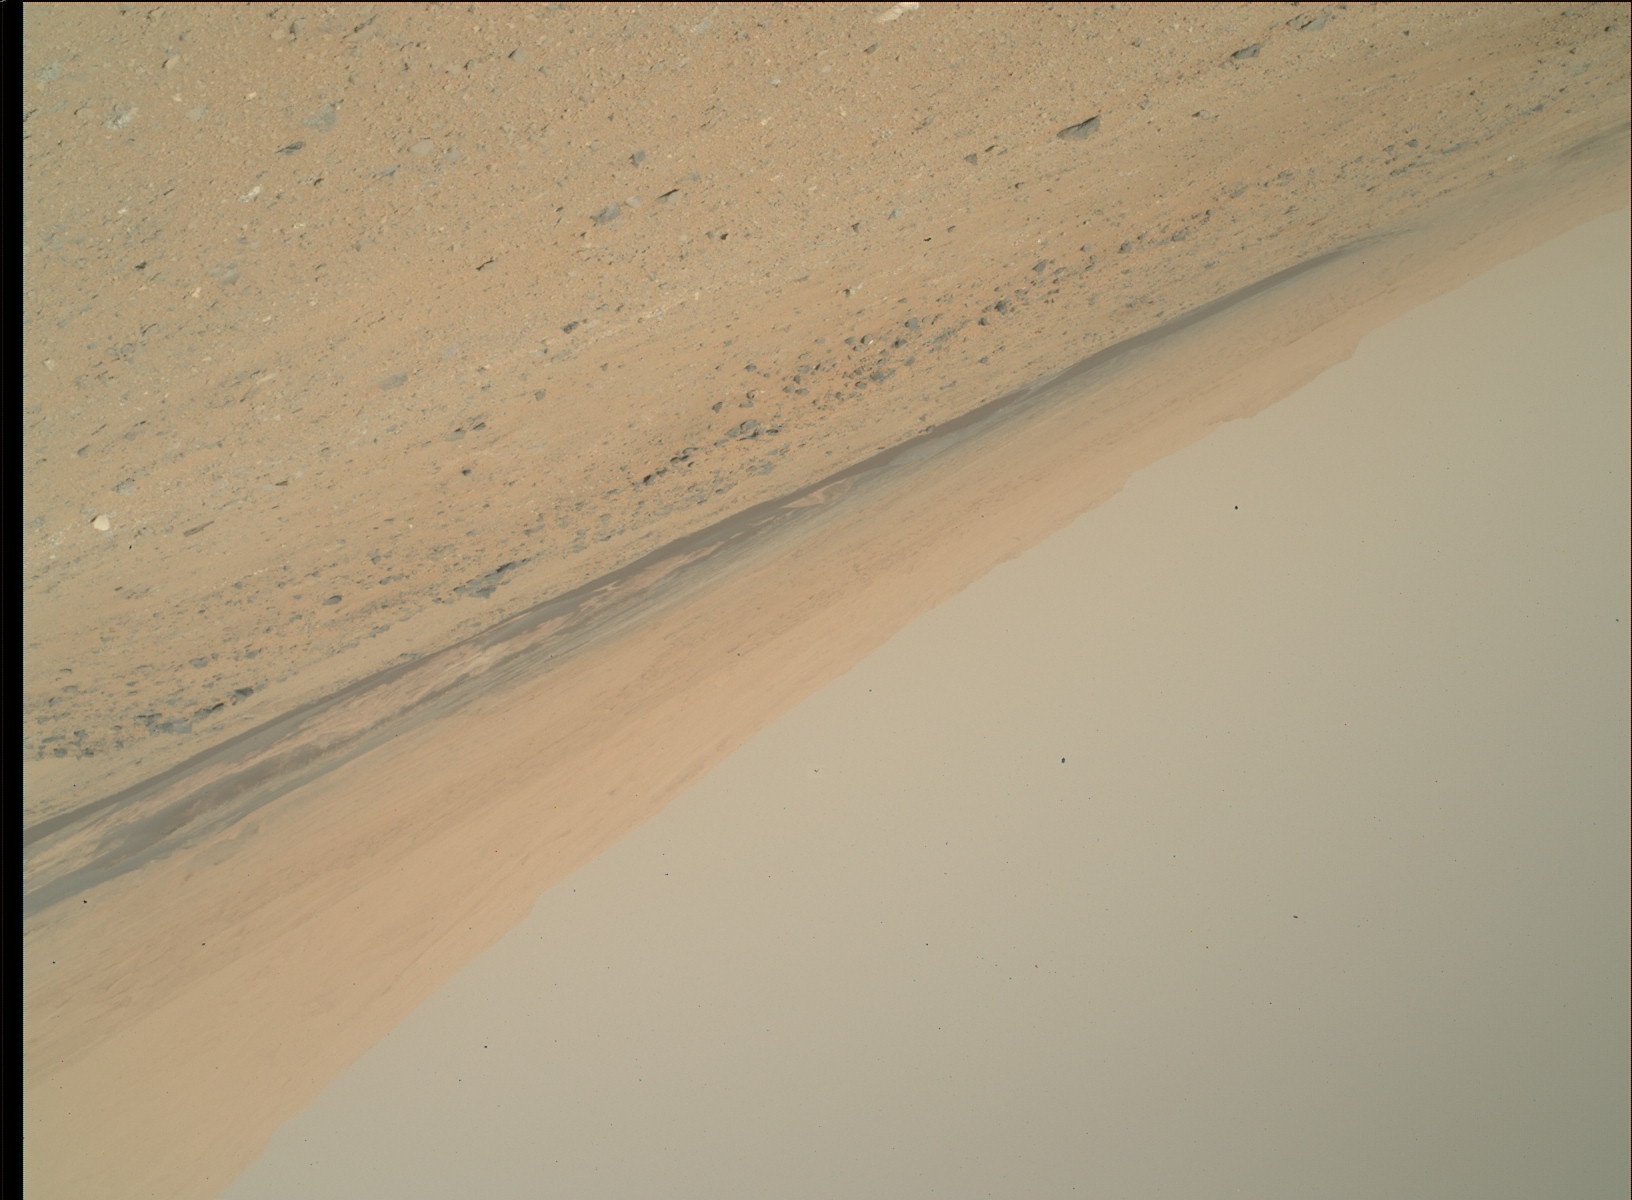 Nasa's Mars rover Curiosity acquired this image using its Mars Hand Lens Imager (MAHLI) on Sol 426